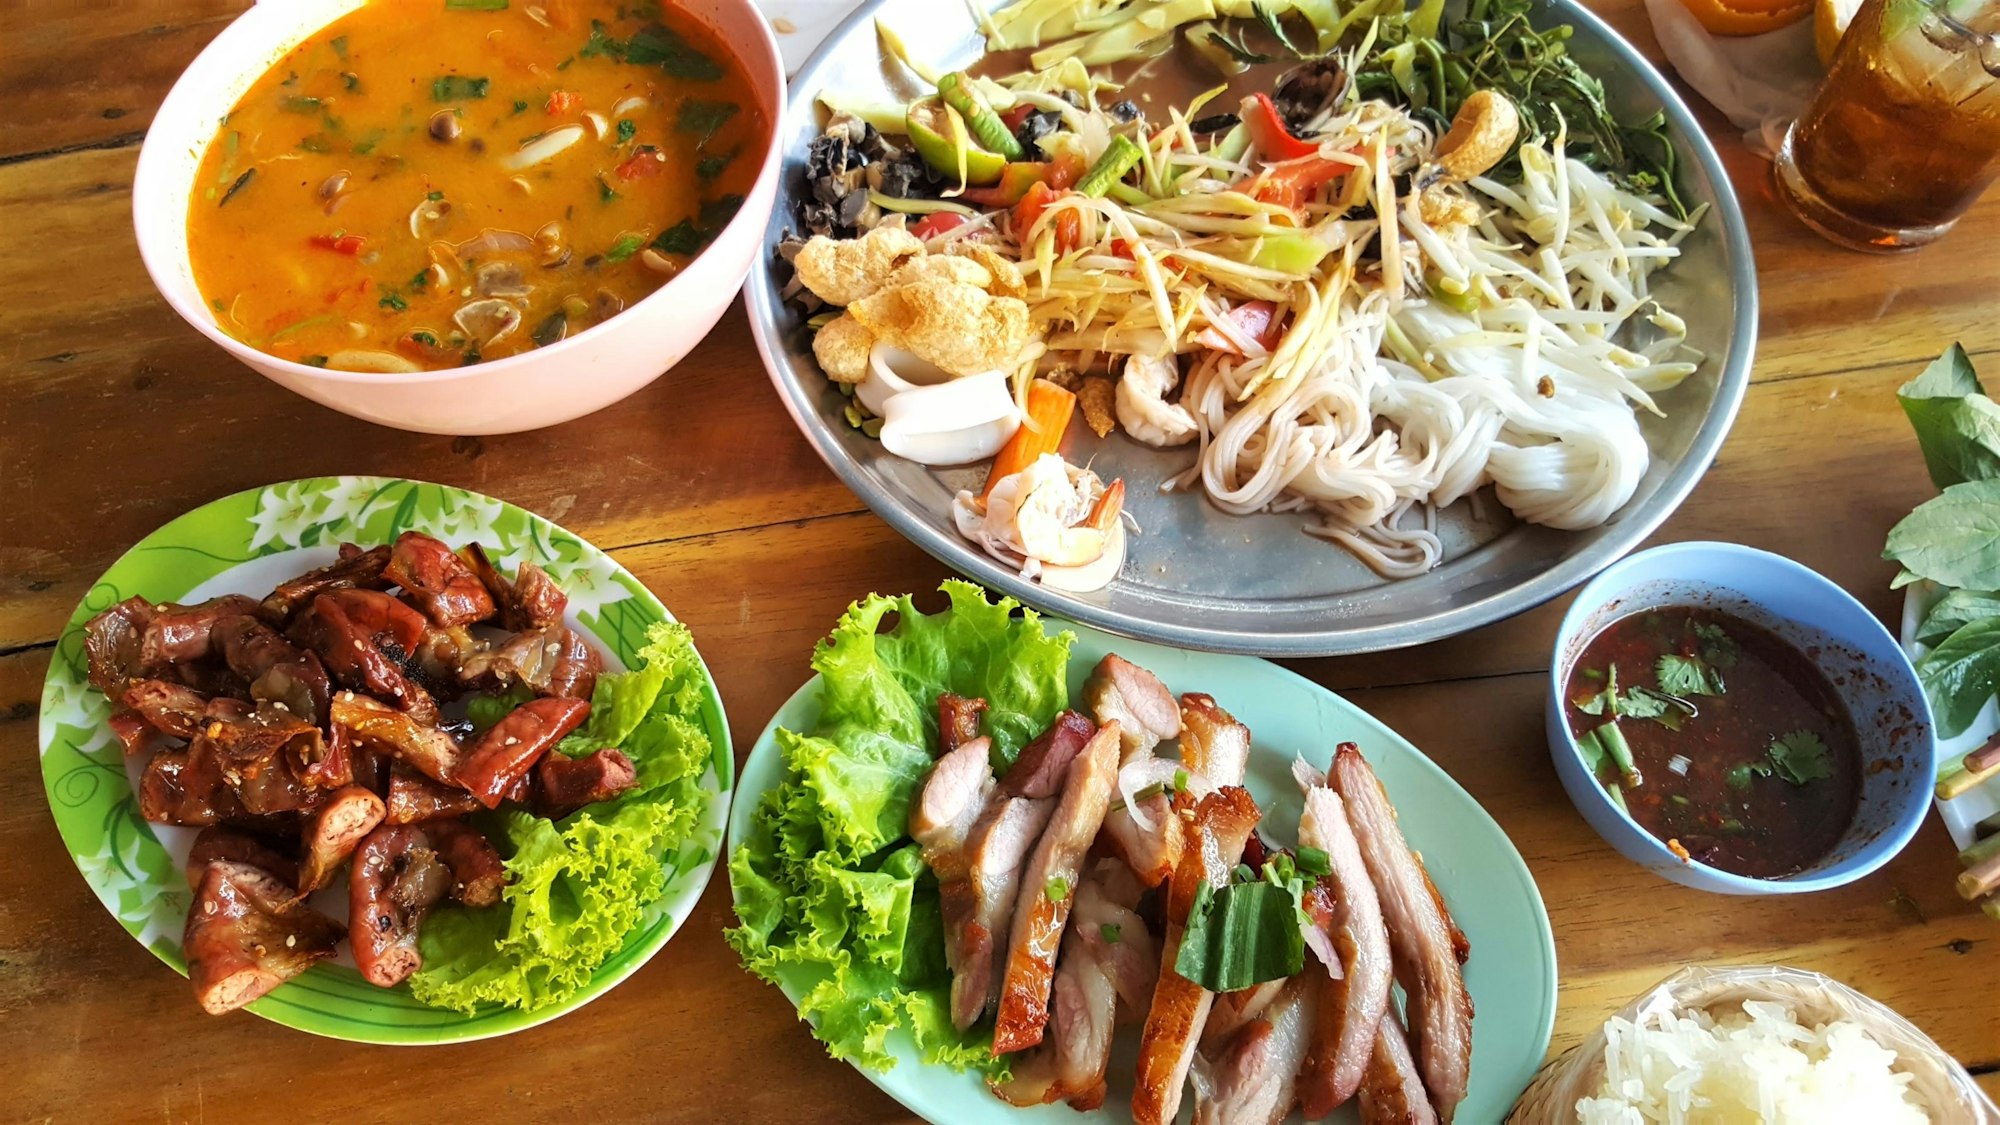 Shop for authentic ingredients and discover the joys of cooking Thai cuisine.